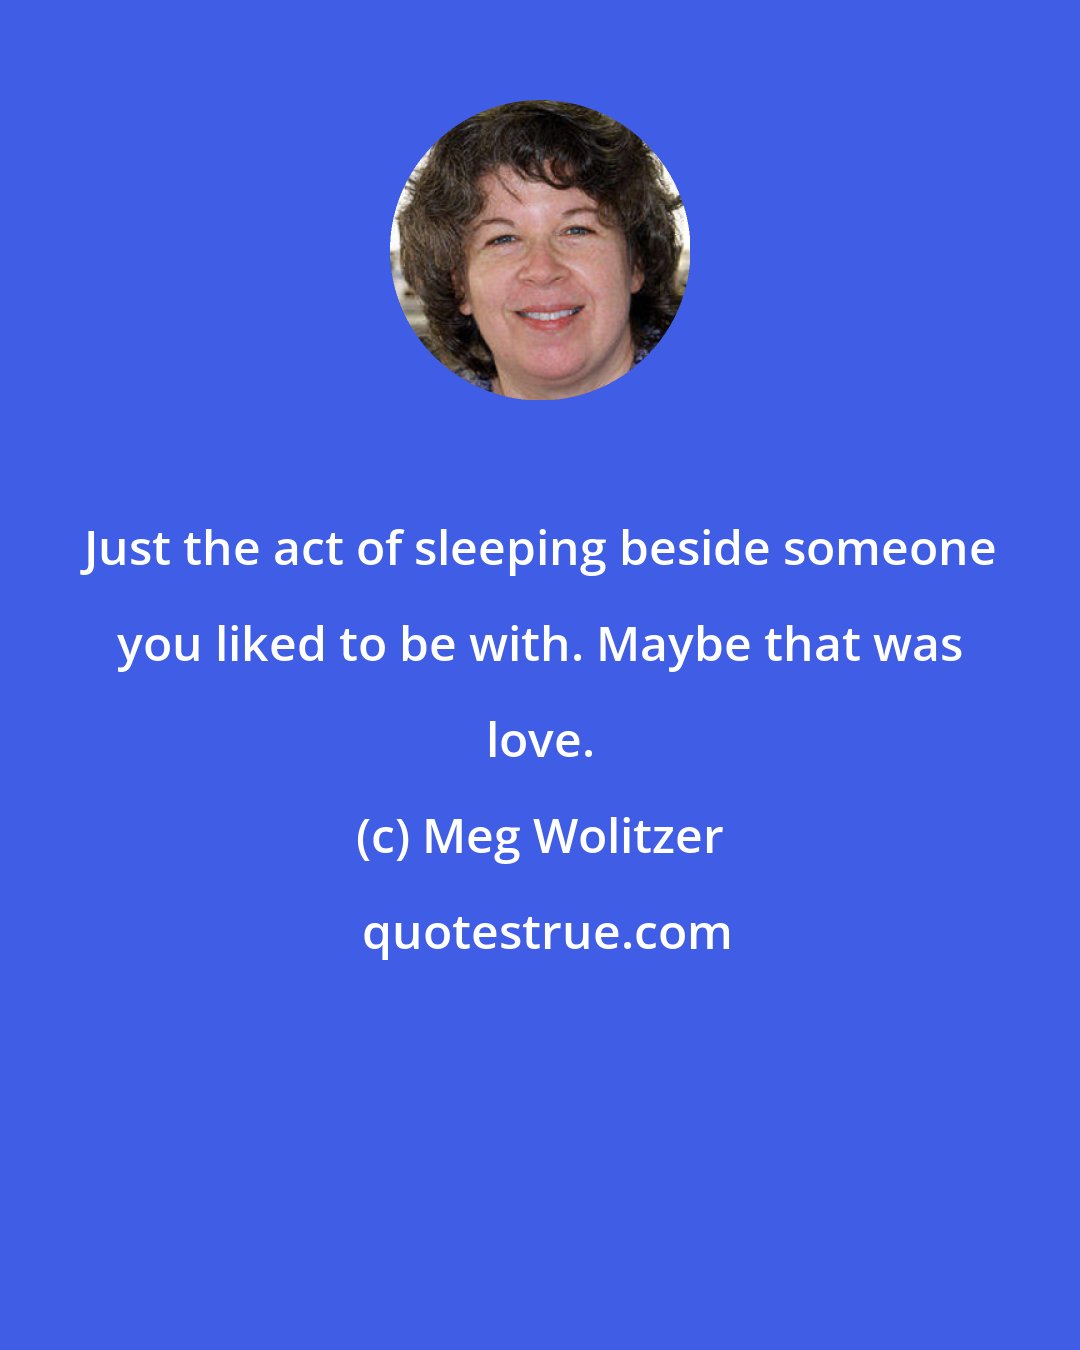 Meg Wolitzer: Just the act of sleeping beside someone you liked to be with. Maybe that was love.